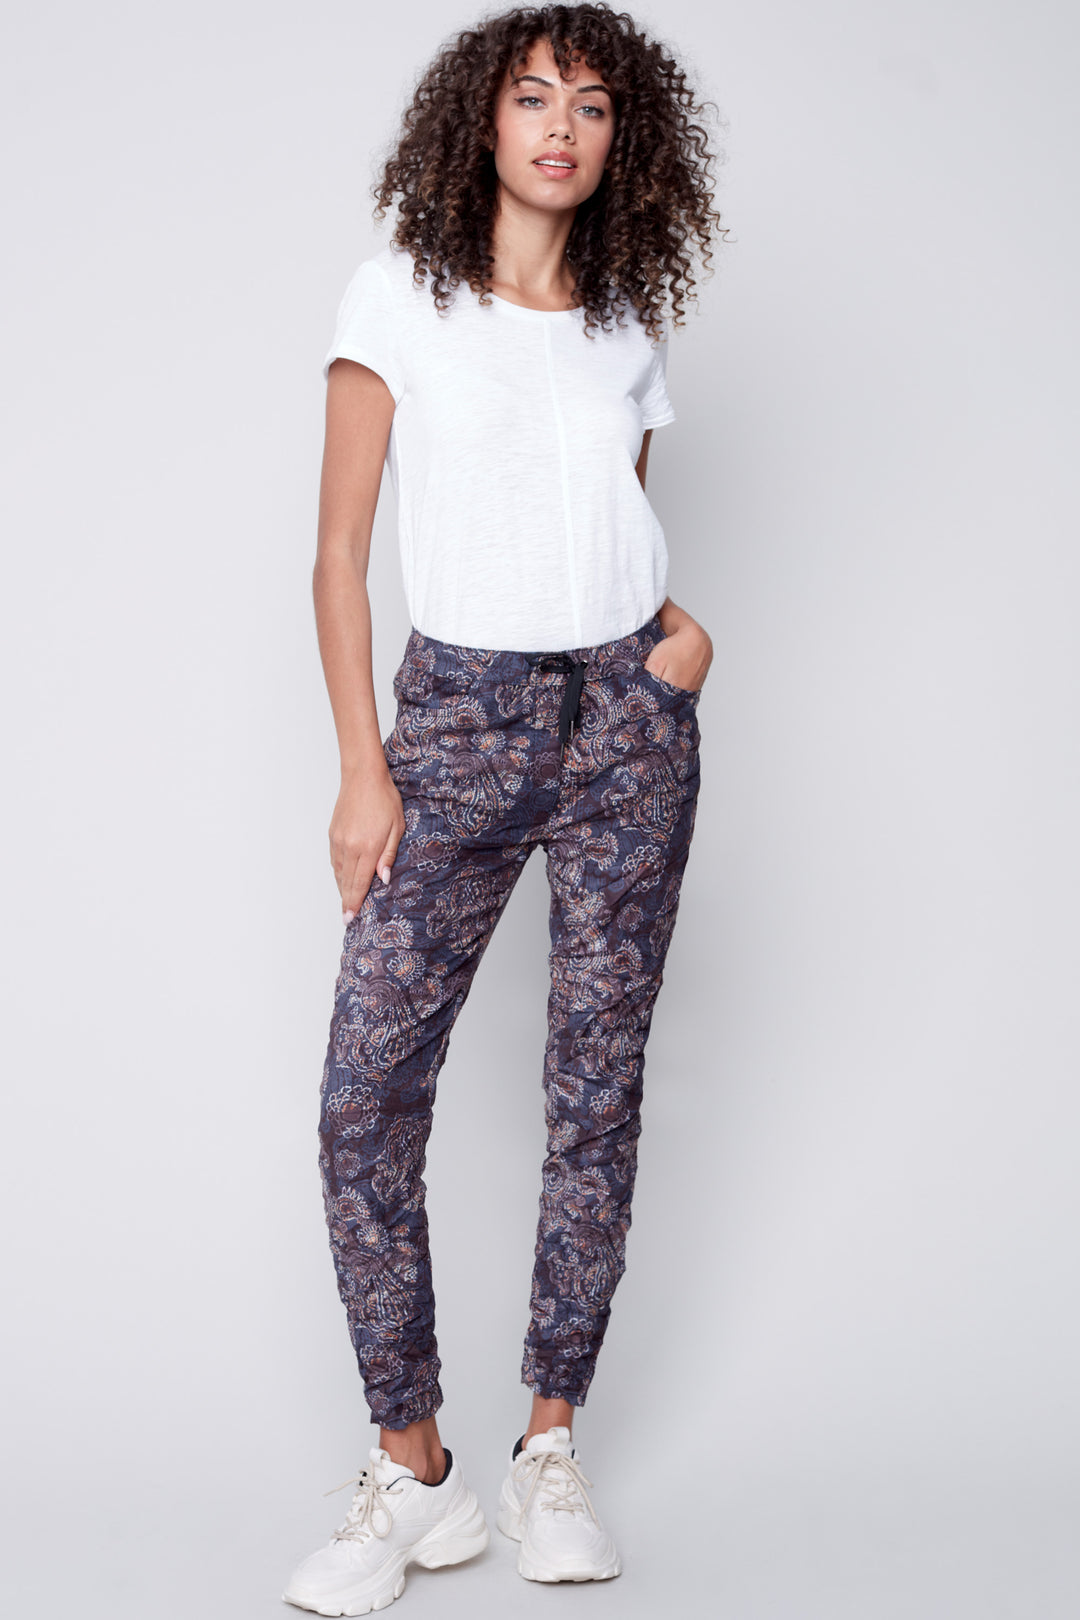 These printed suede crinkle jogger pants are not only absolutely stunning, but also offer maximum comfort!